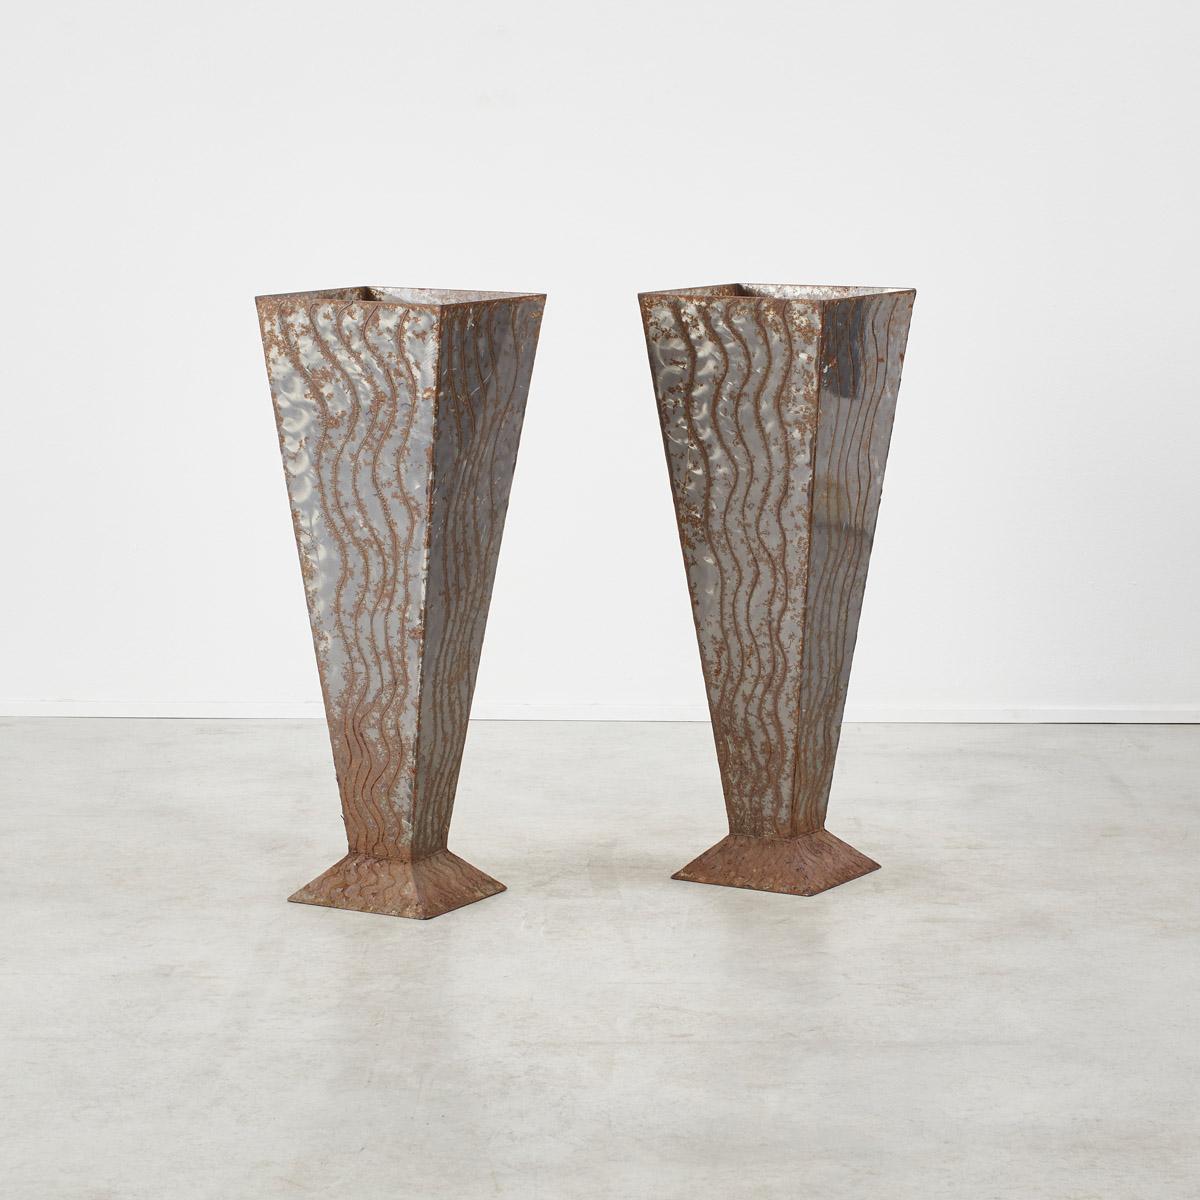 Standing to attention, this pair of artisanal steel planters have a brutalist feel to them and are a striking accessory to any entrance. Their surfaces are covered in wave-like markings which over time have allowed the surface to develop a pleasing